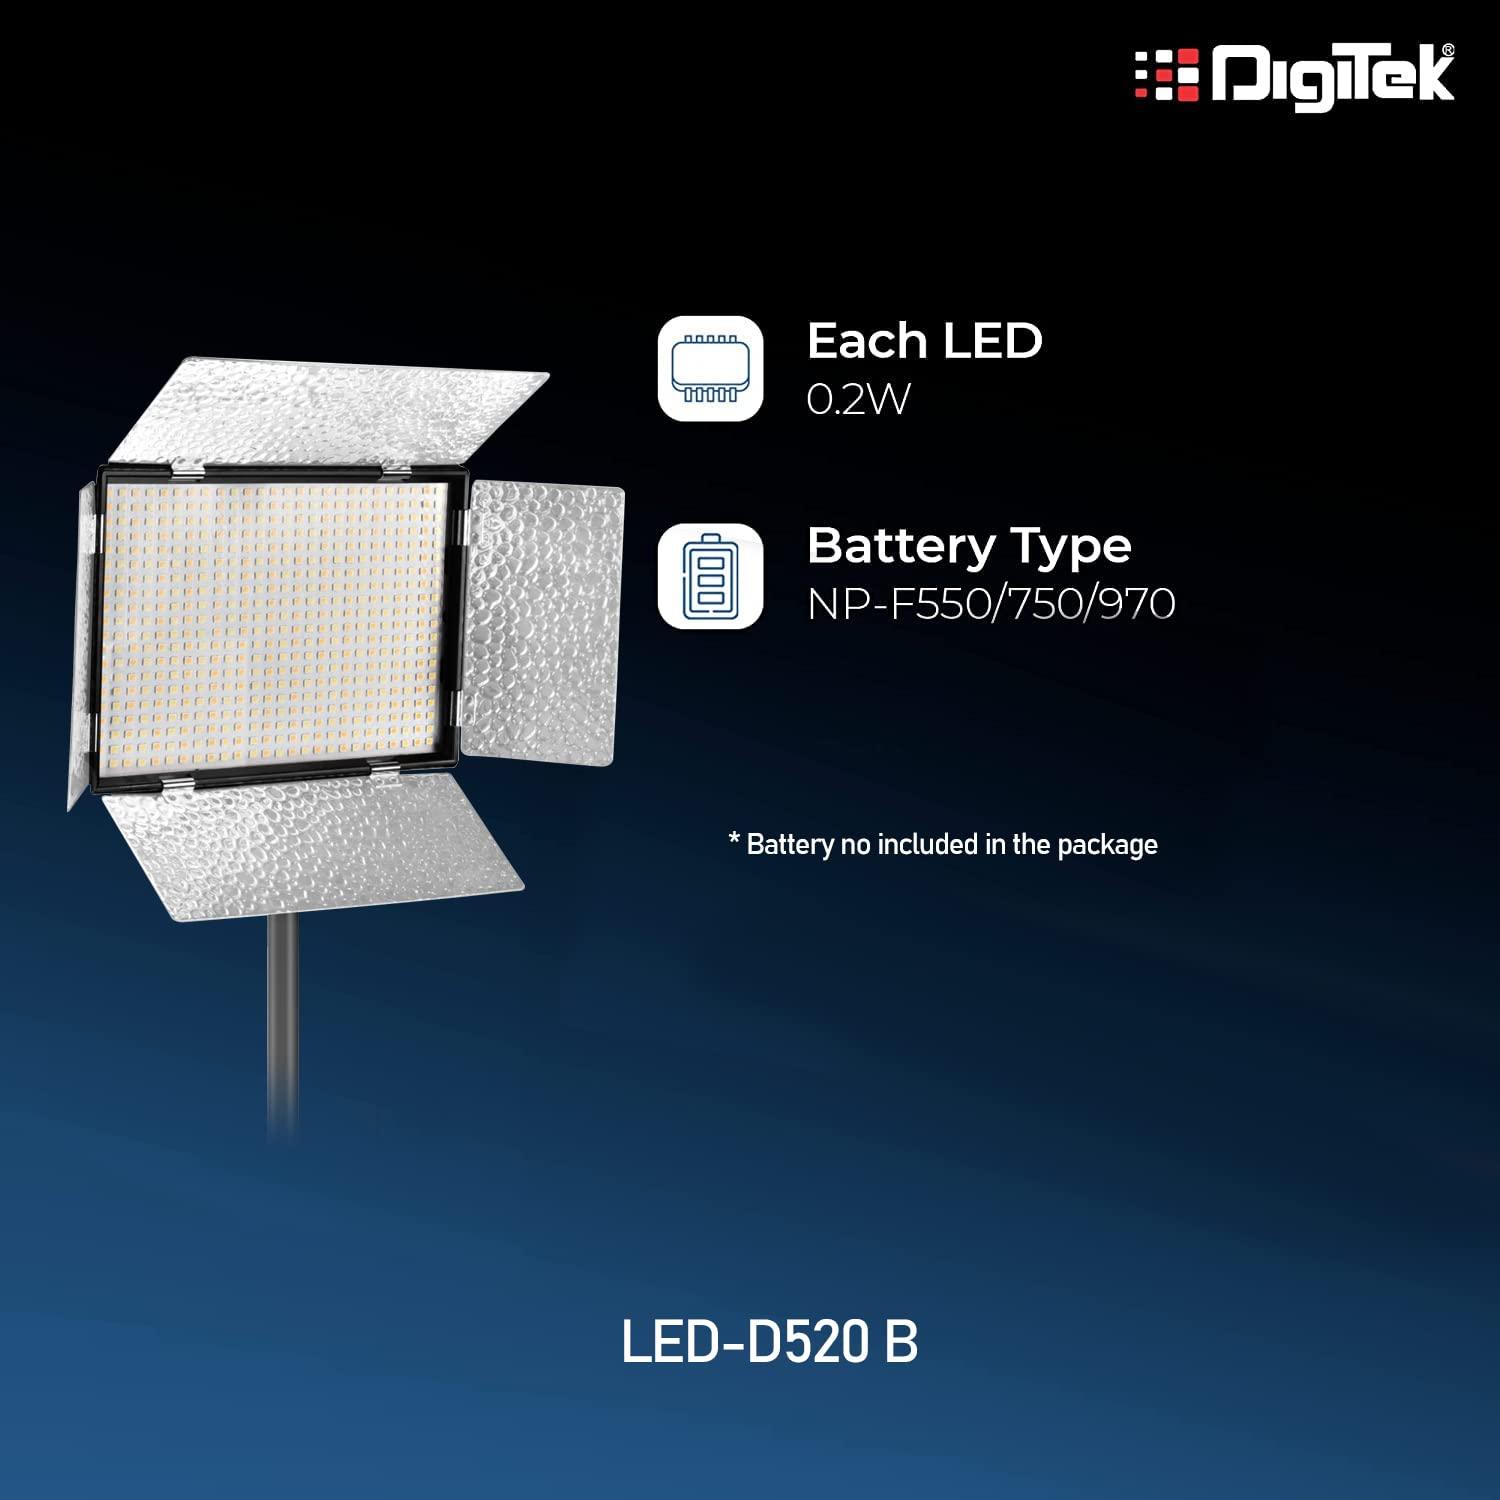 Digitek (LED-D520 B) Professional LED 37W Video Light Compatible with Tripods, Monopods, Cameras, Table Stand & Camcorder, for YouTube Video, Product Photography, Makeup Shoot Proudly Make in India - Digitek